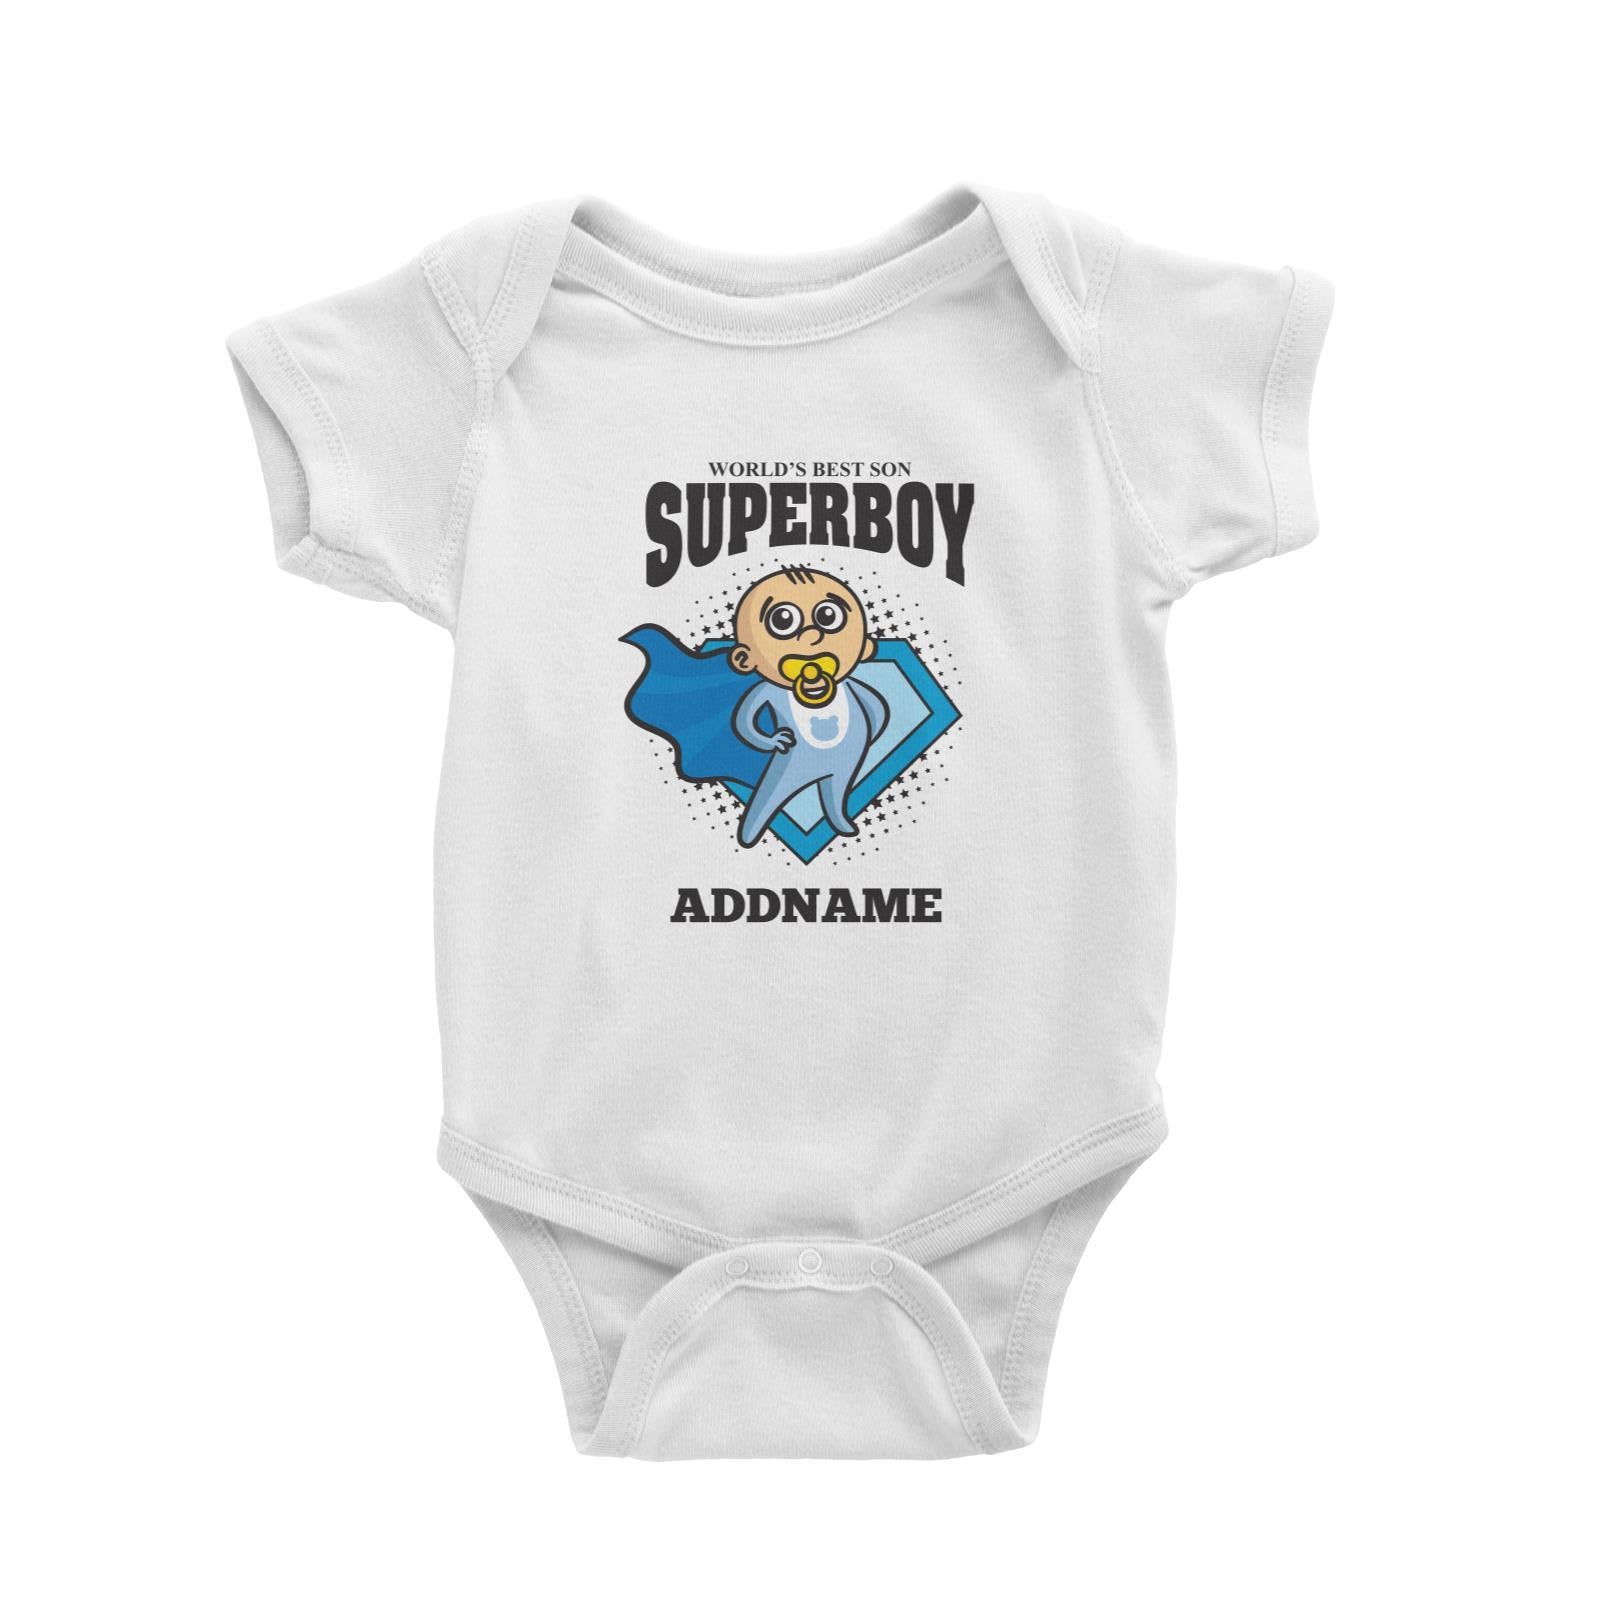 Best Son Superboy Baby Baby Romper Personalizable Designs Matching Family Superhero Family Edition Superhero